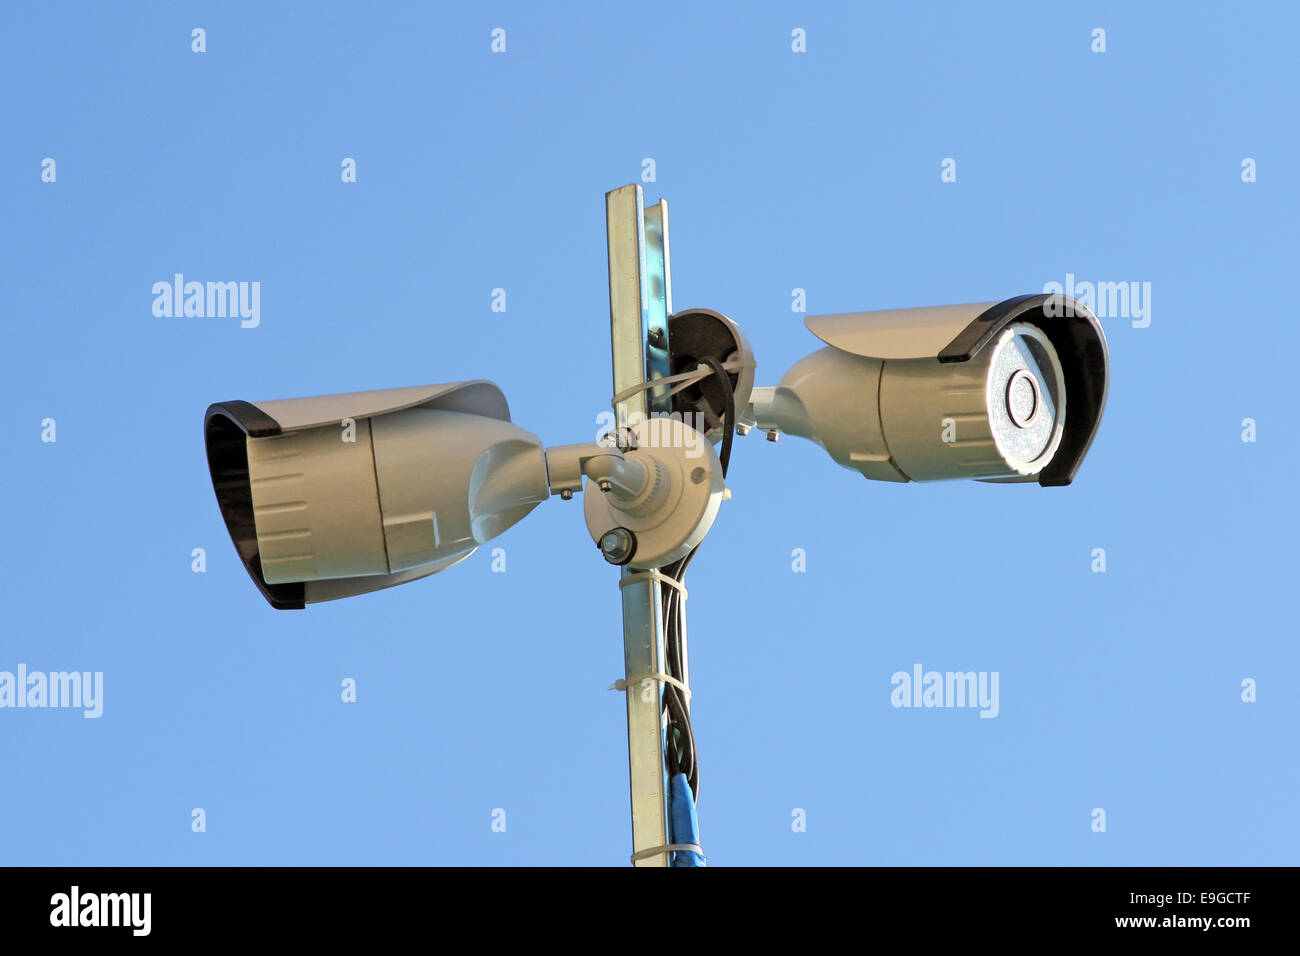 Two security cameras against blue sky Stock Photo